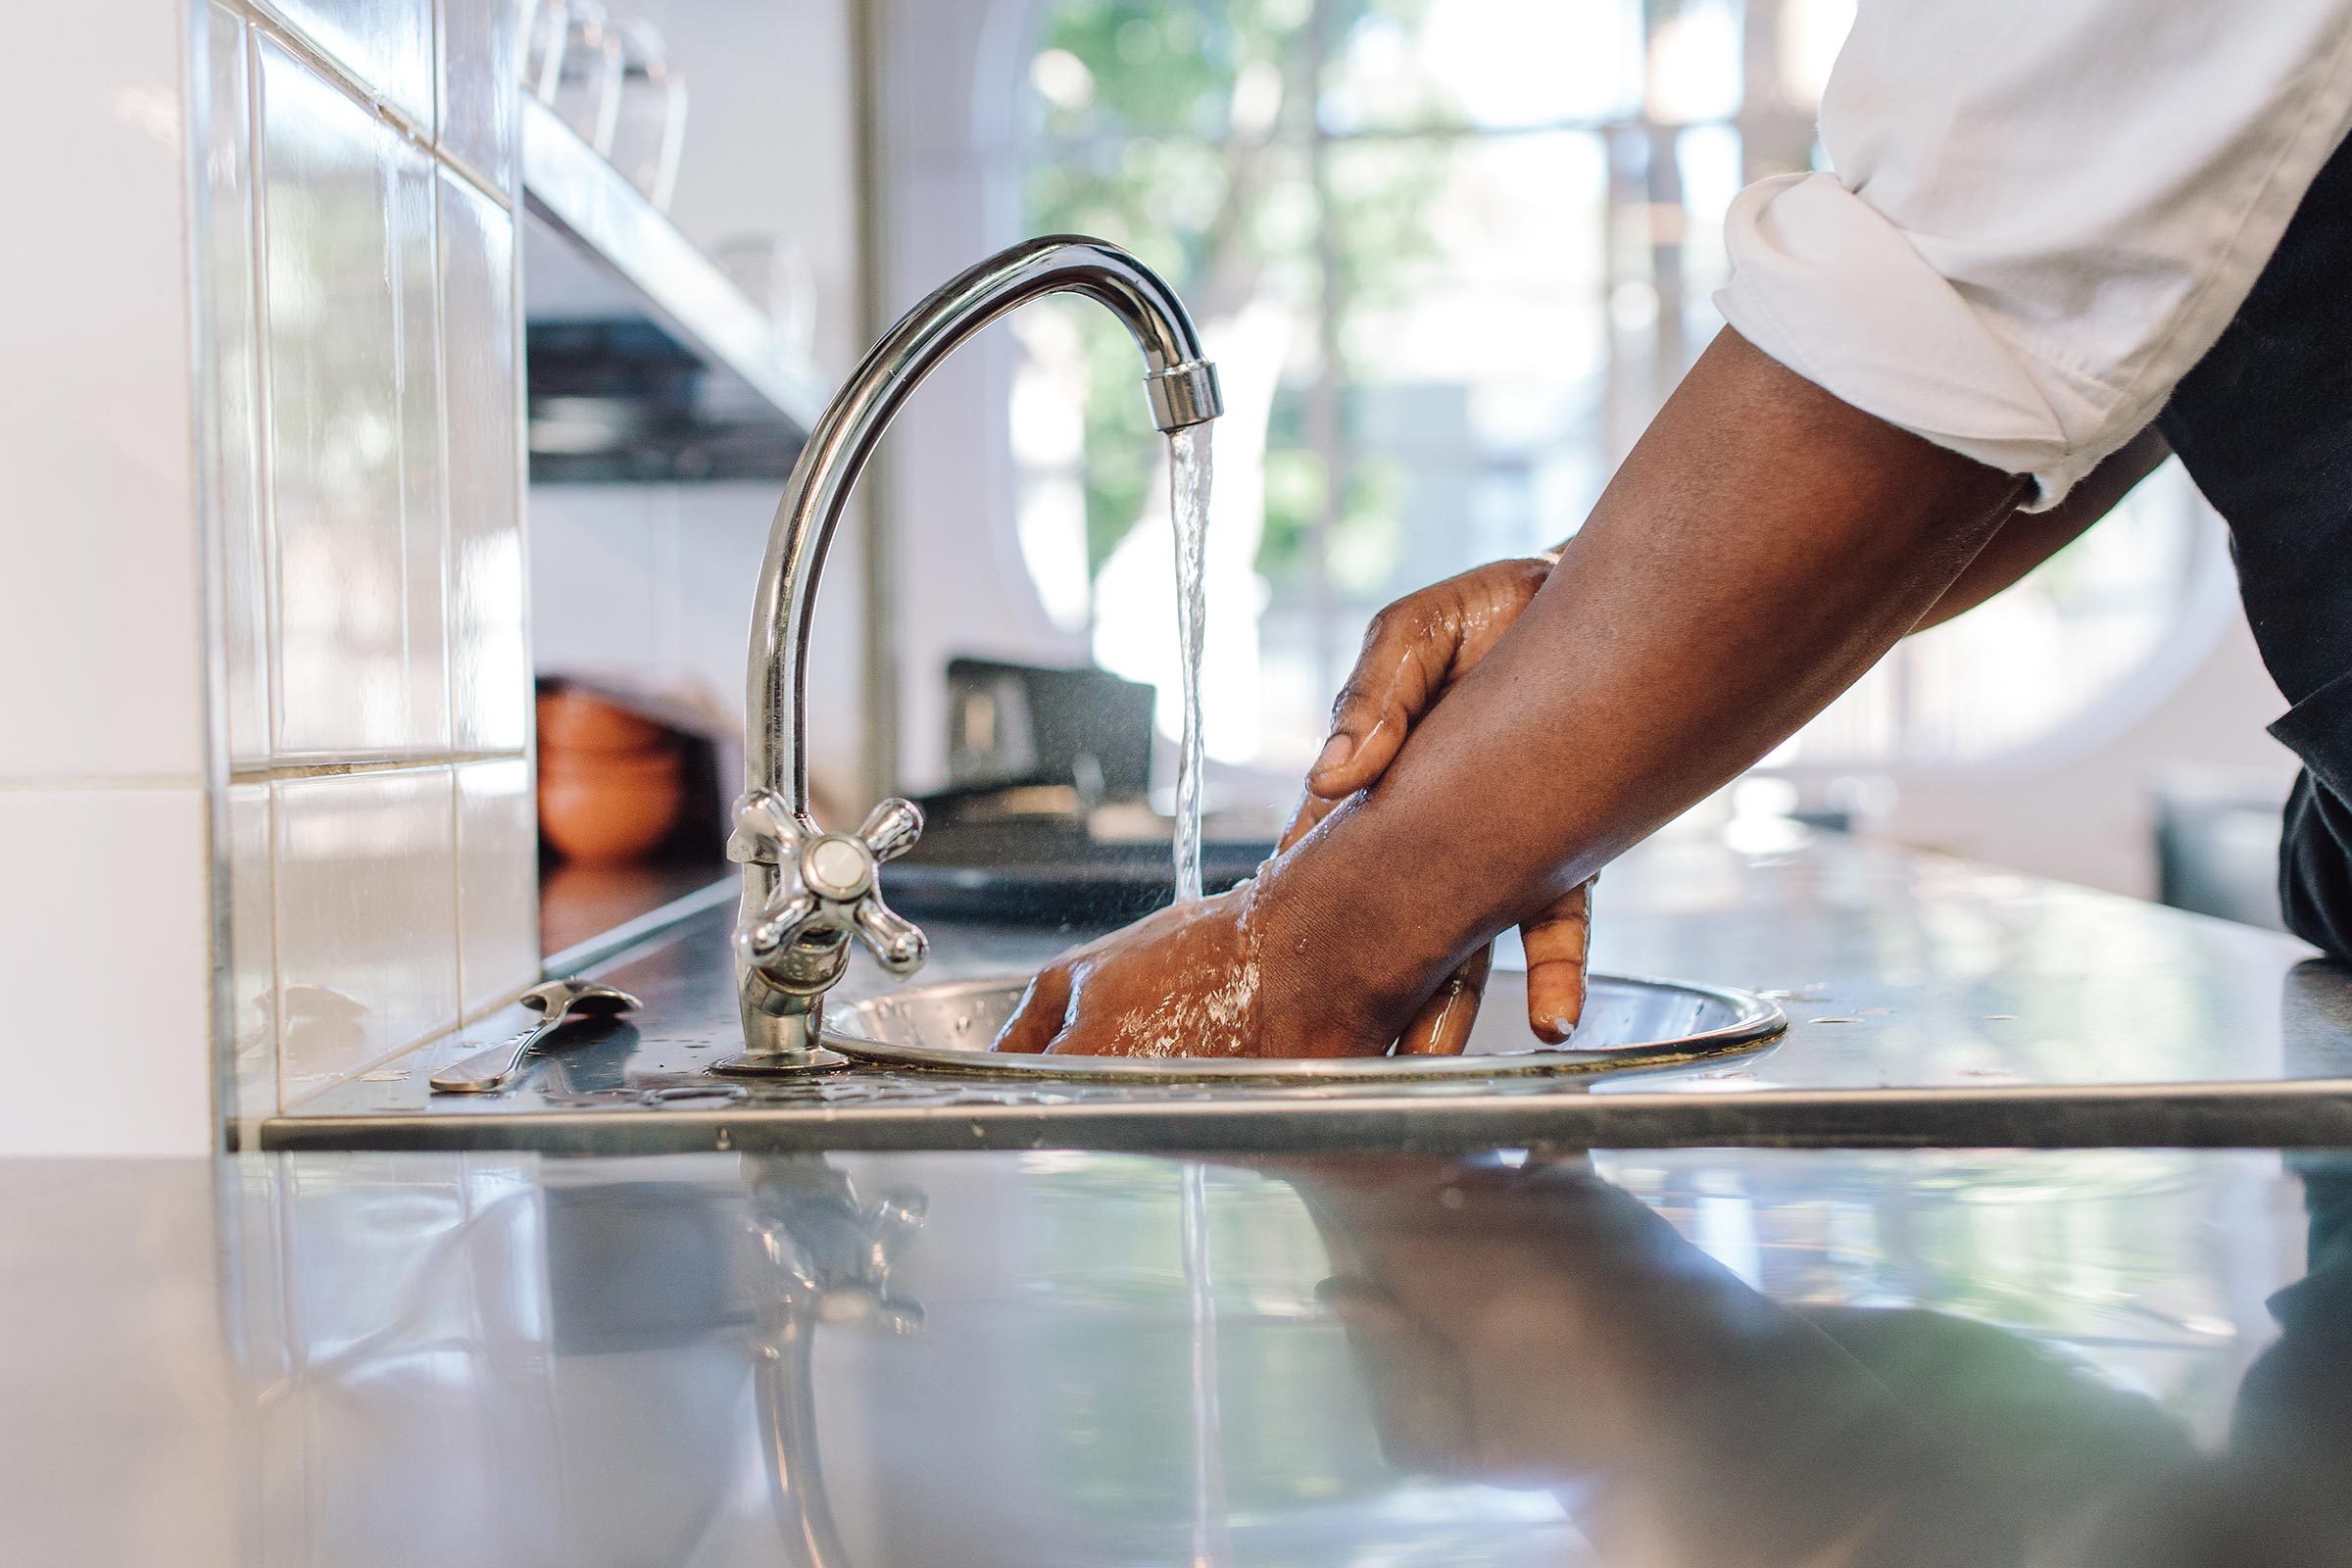 7 Things That Can Happen If You Don't Wash Your Hands